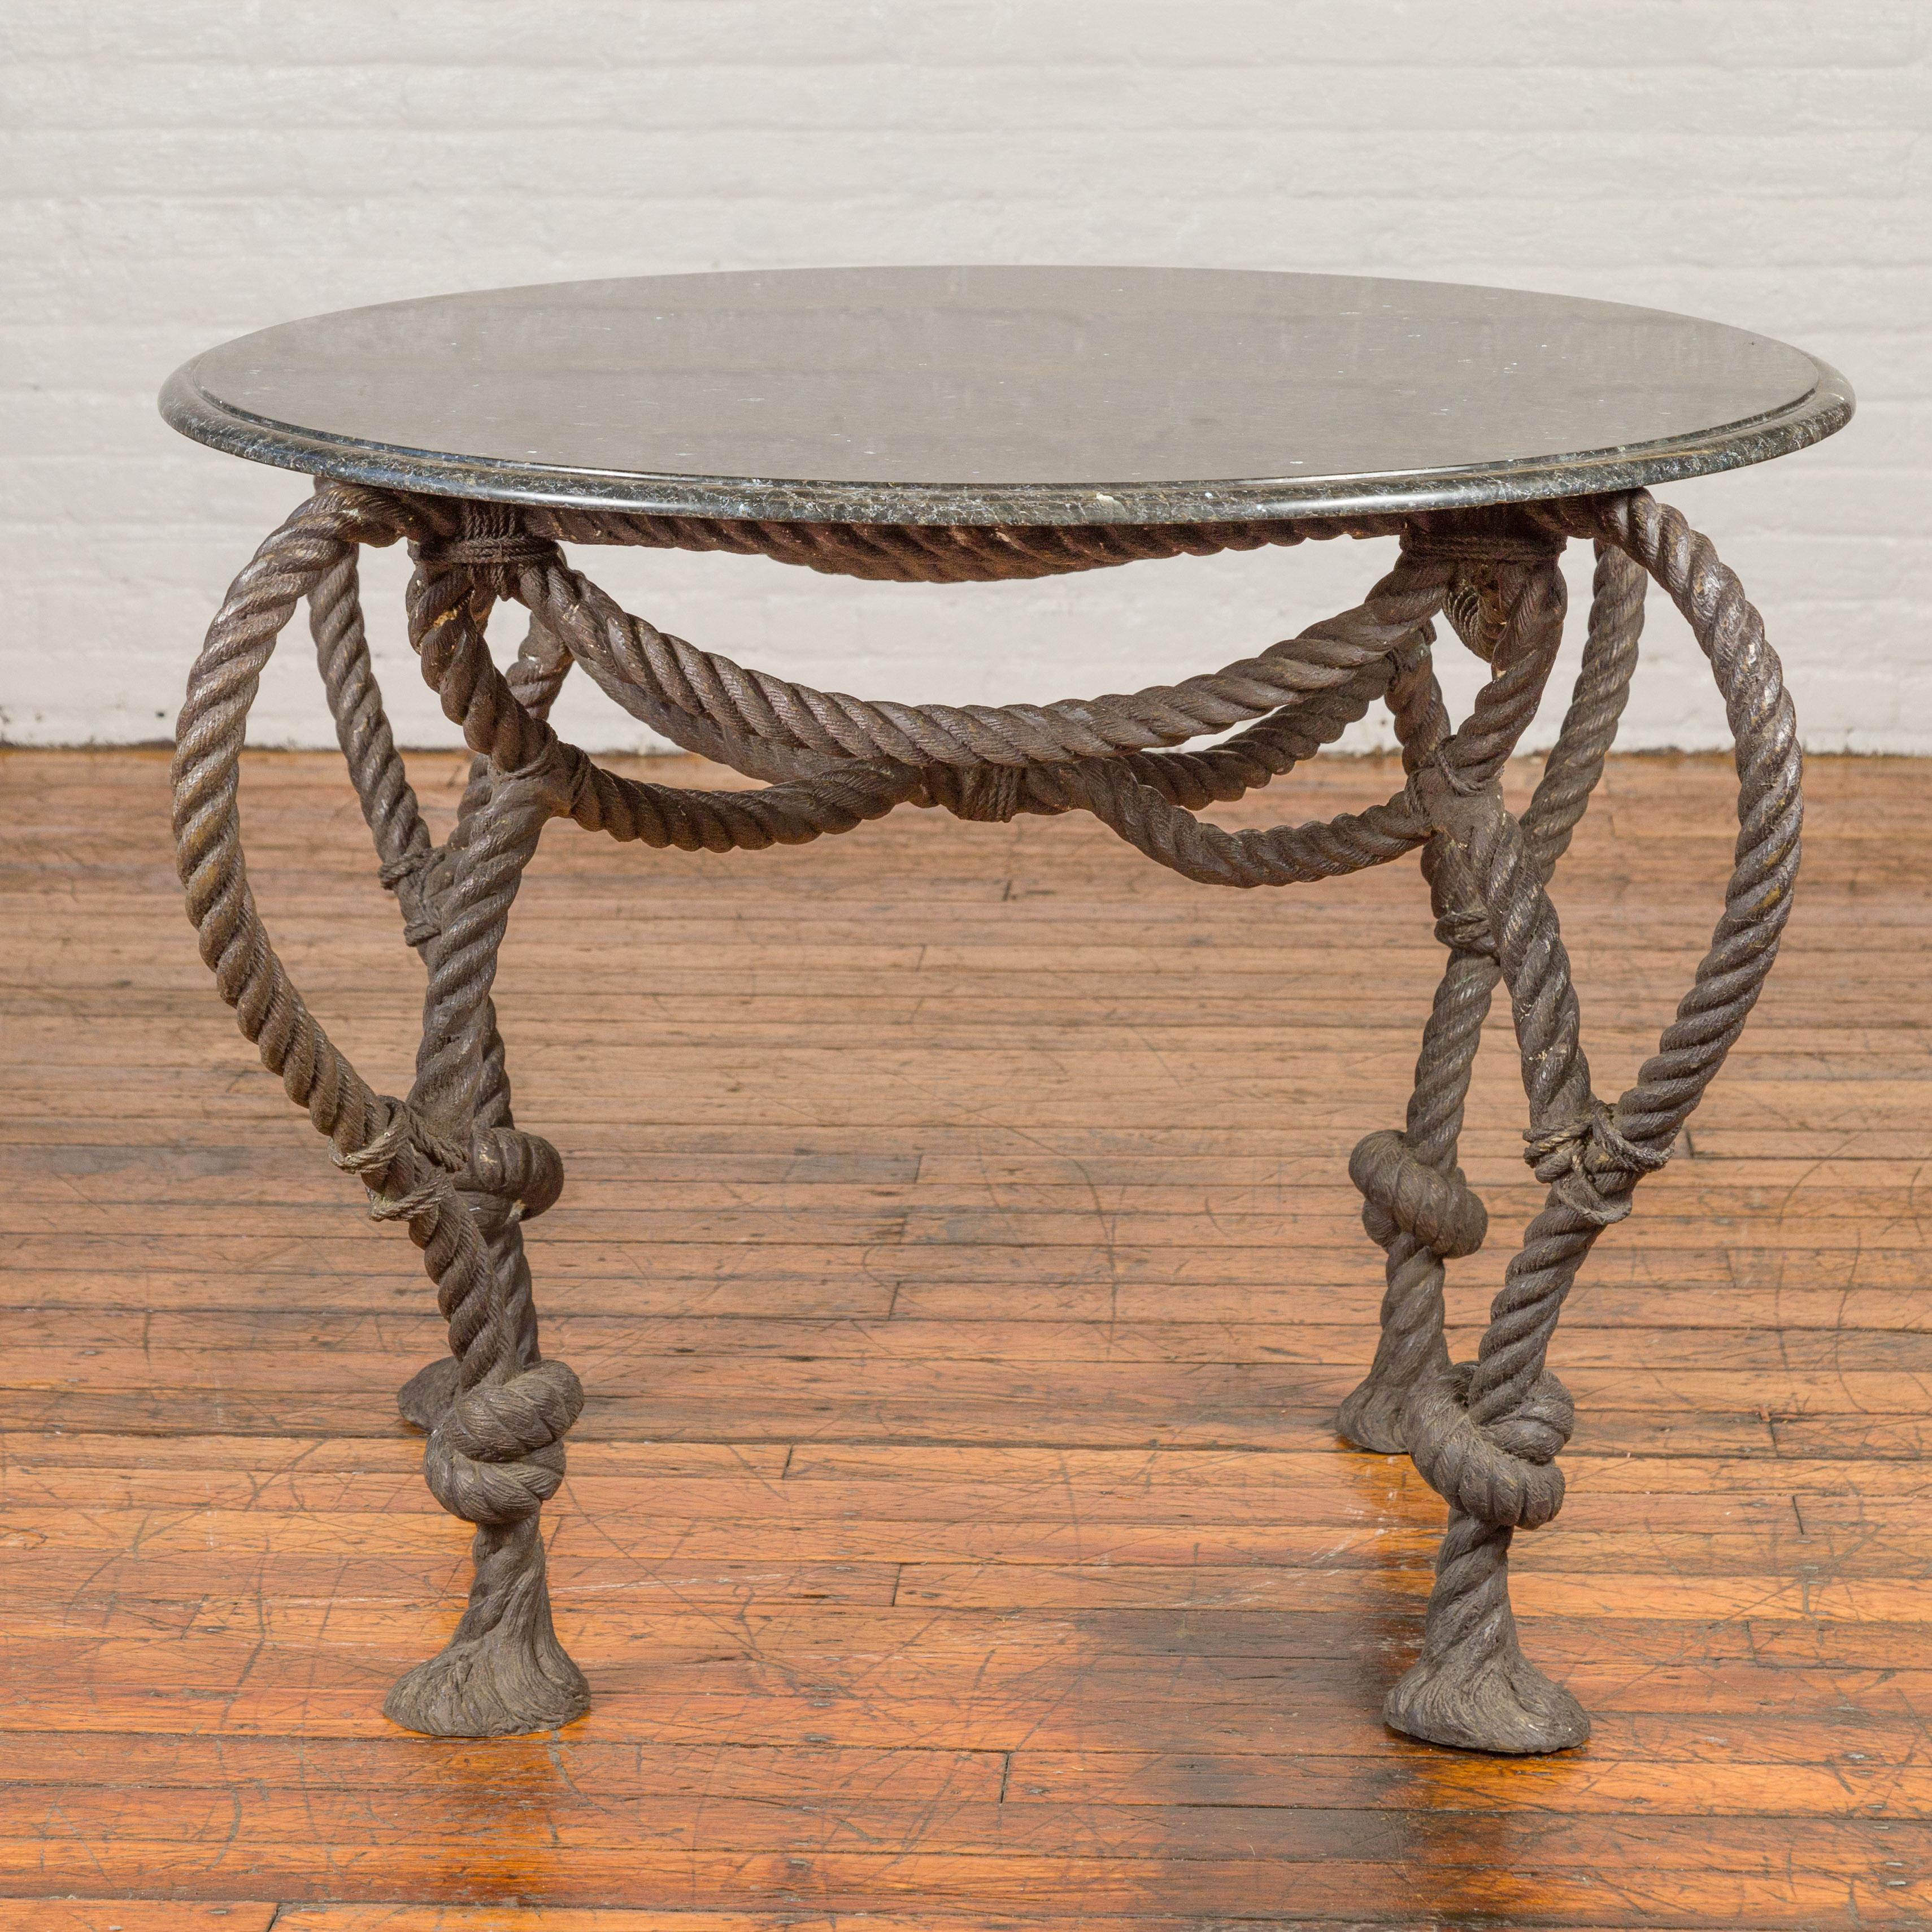 A contemporary bronze dining table or center table base in the manner of Maison Jansen, with nautical rope theme, tassels and dark patina. The tops are not included but shown on the photos to allow a better visualization of the possibilities.